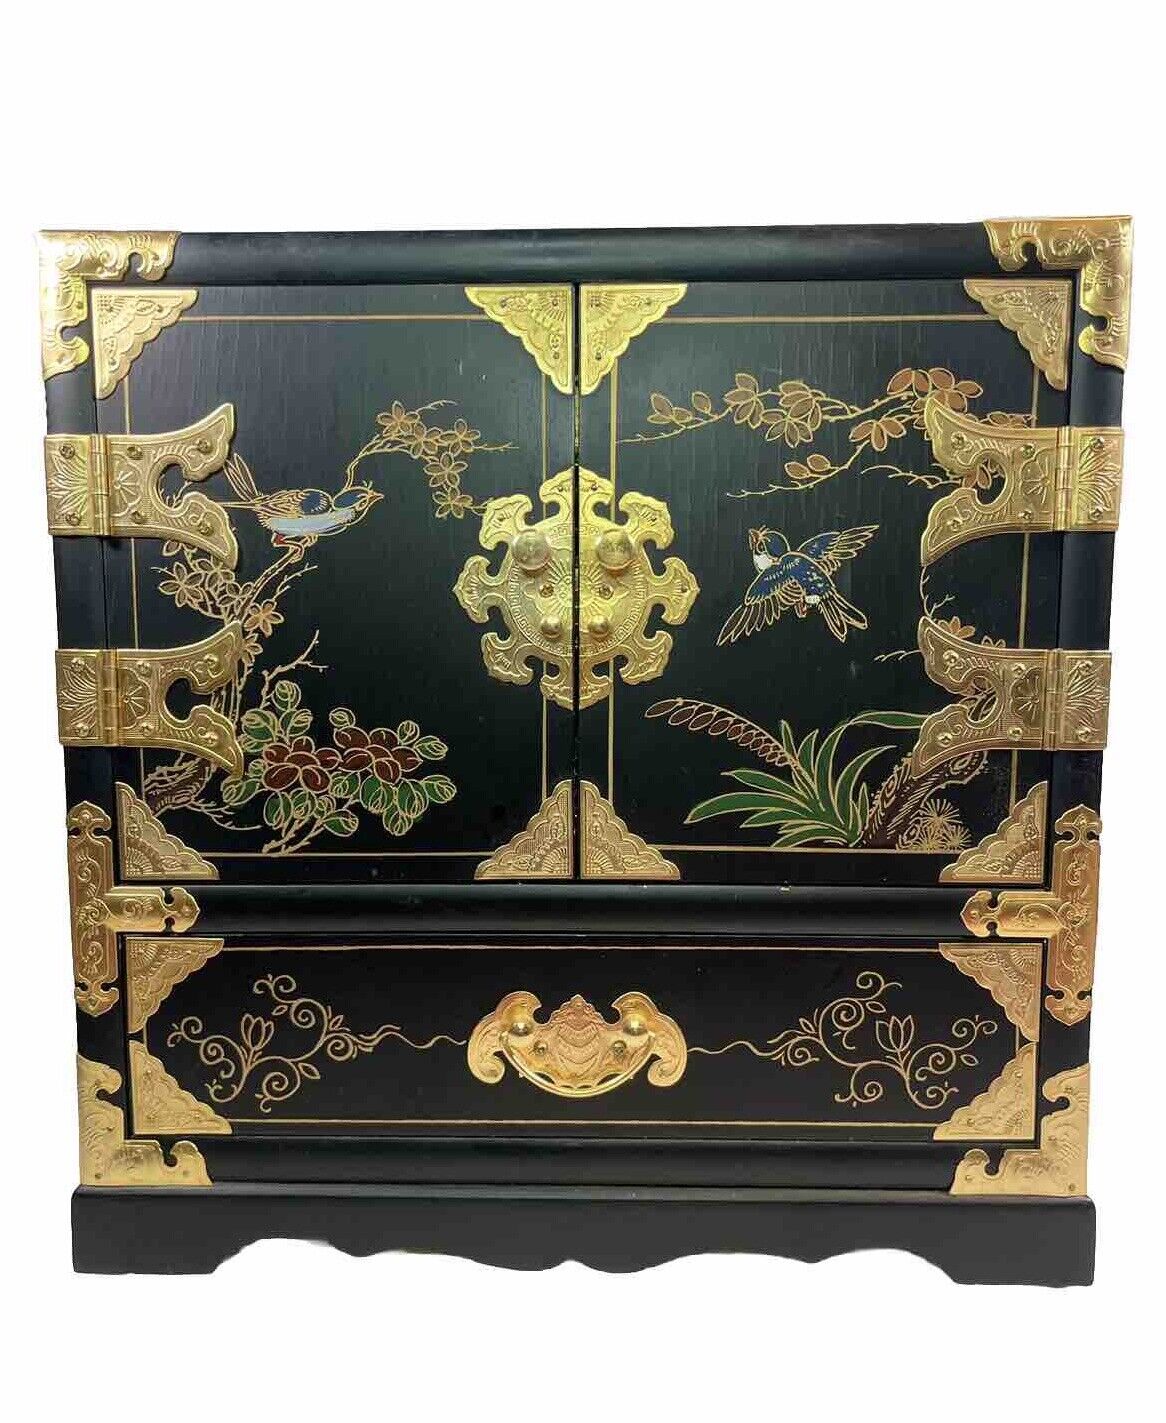 Vintage Handmade Oriental Black Lacquer Jewelry Cabinet, Wood, Brass